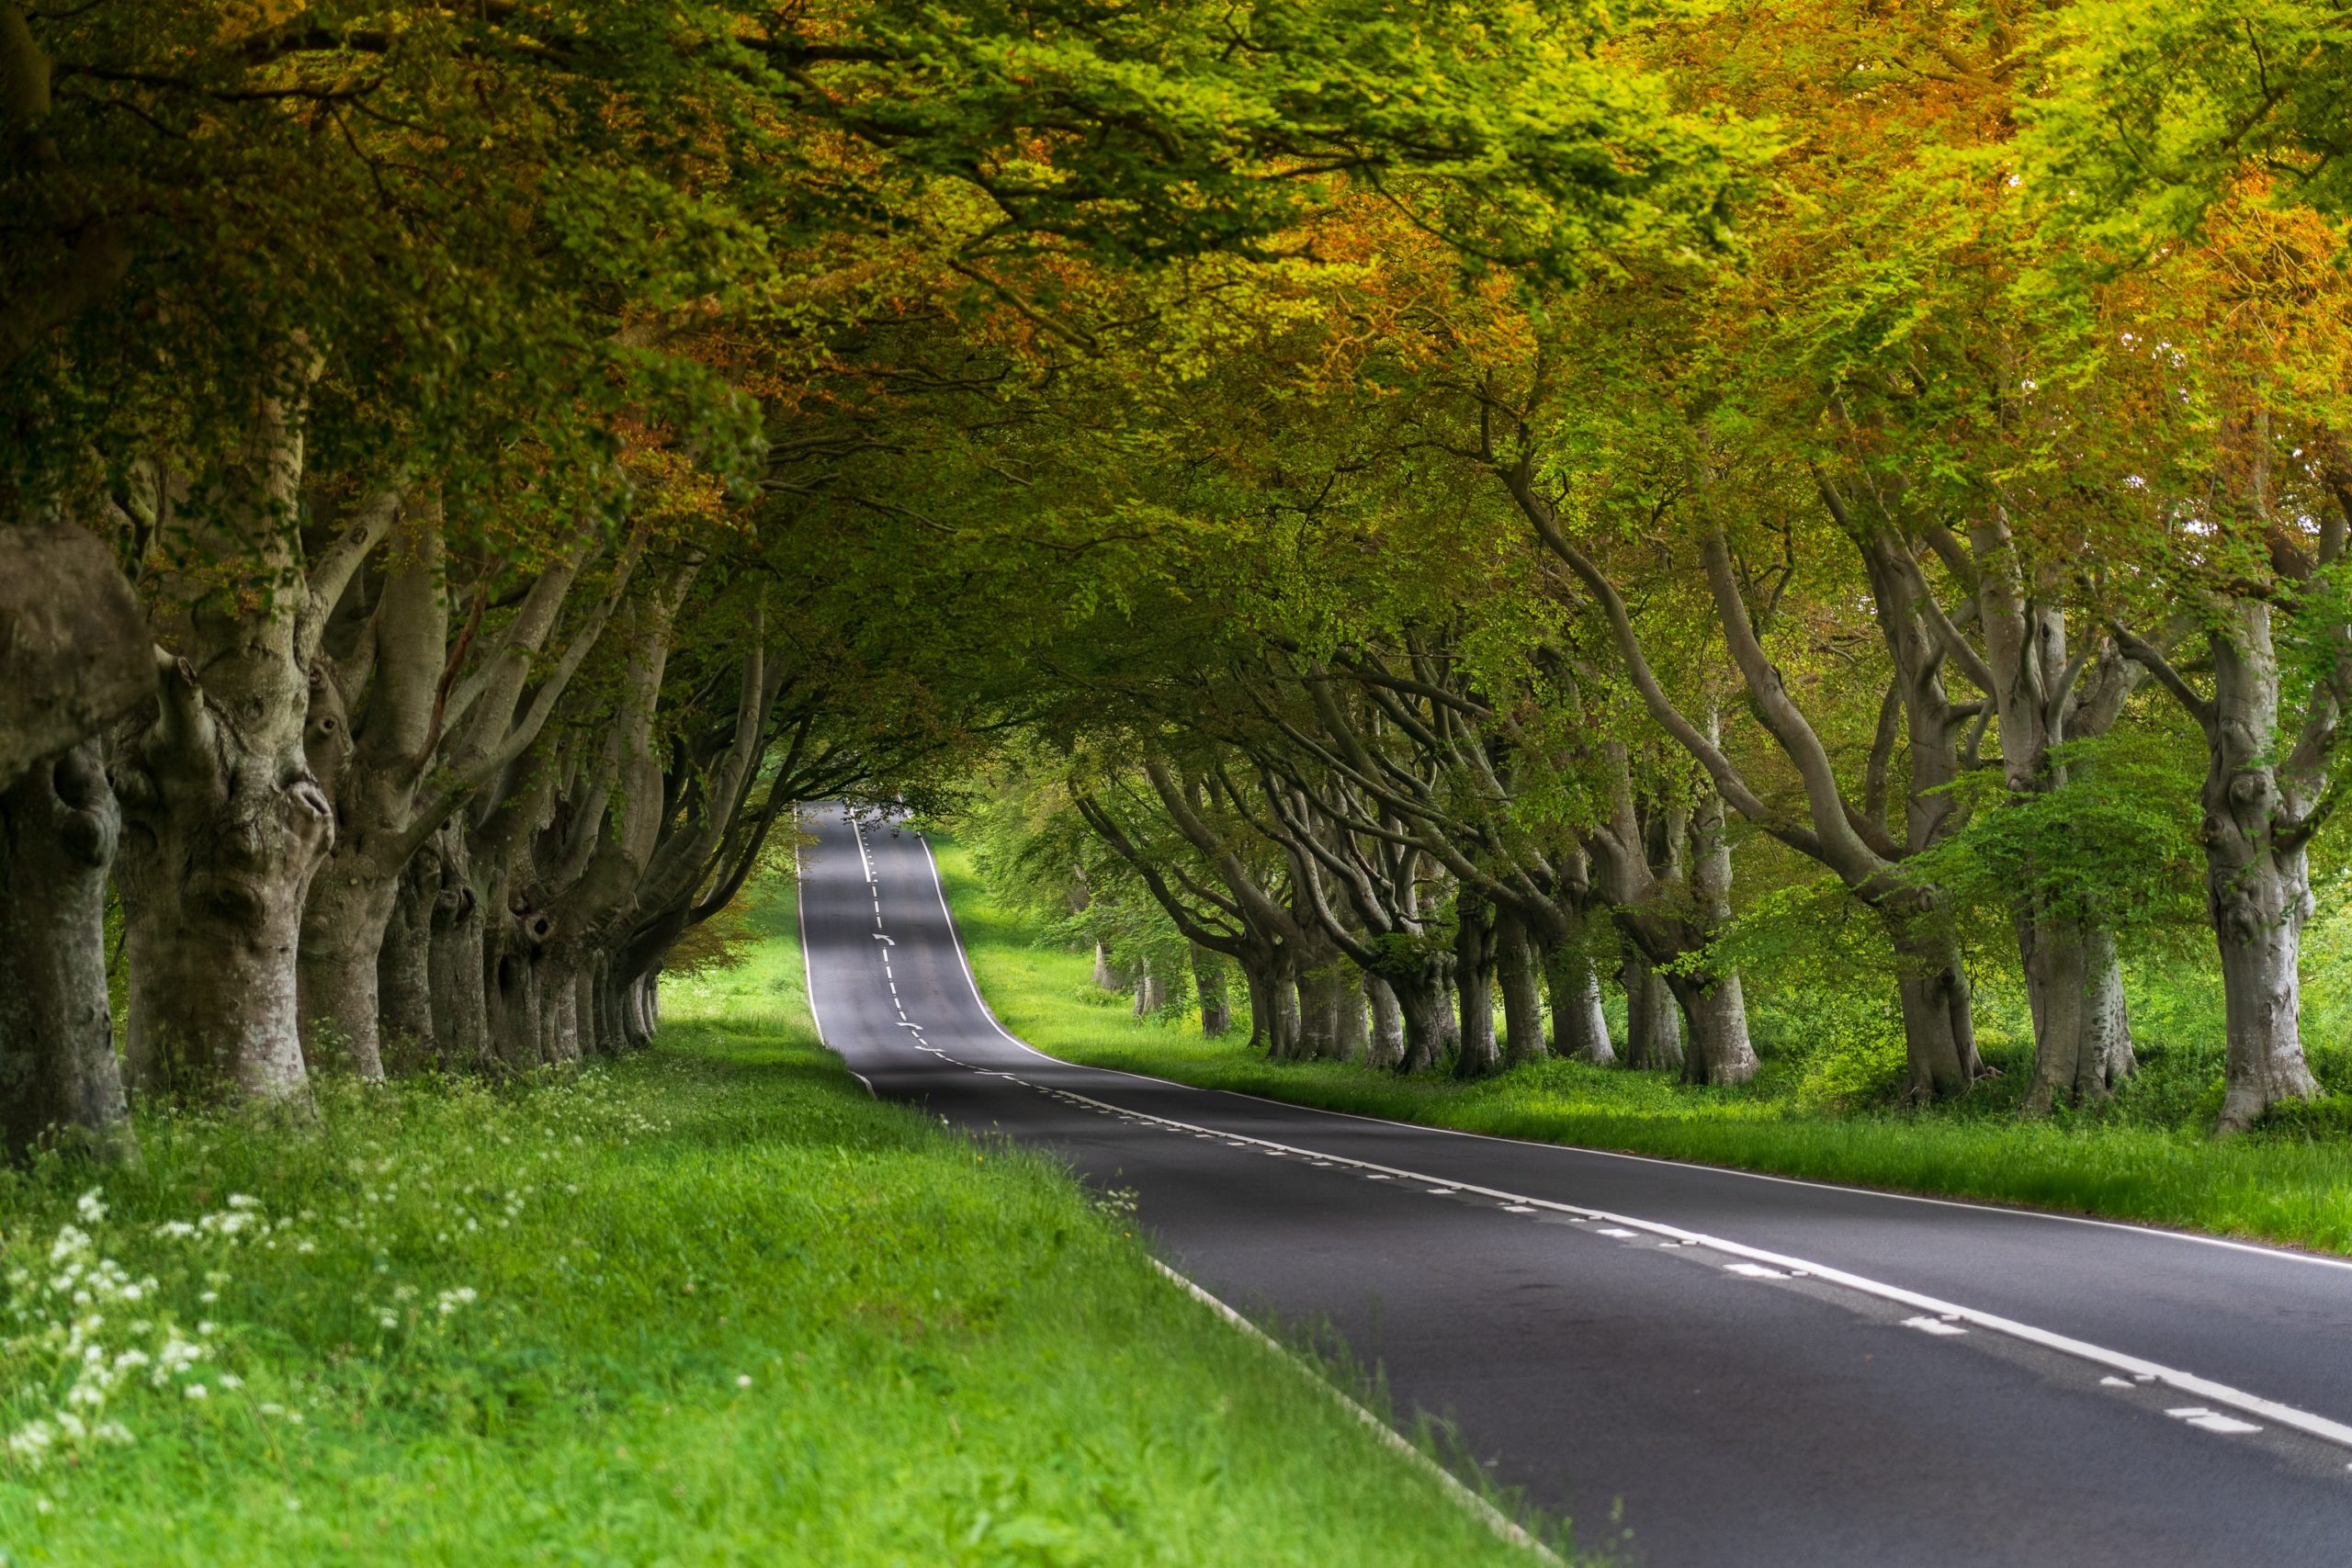 On either side of a road that is slowly going uphill, there is both lush green grass and trees.